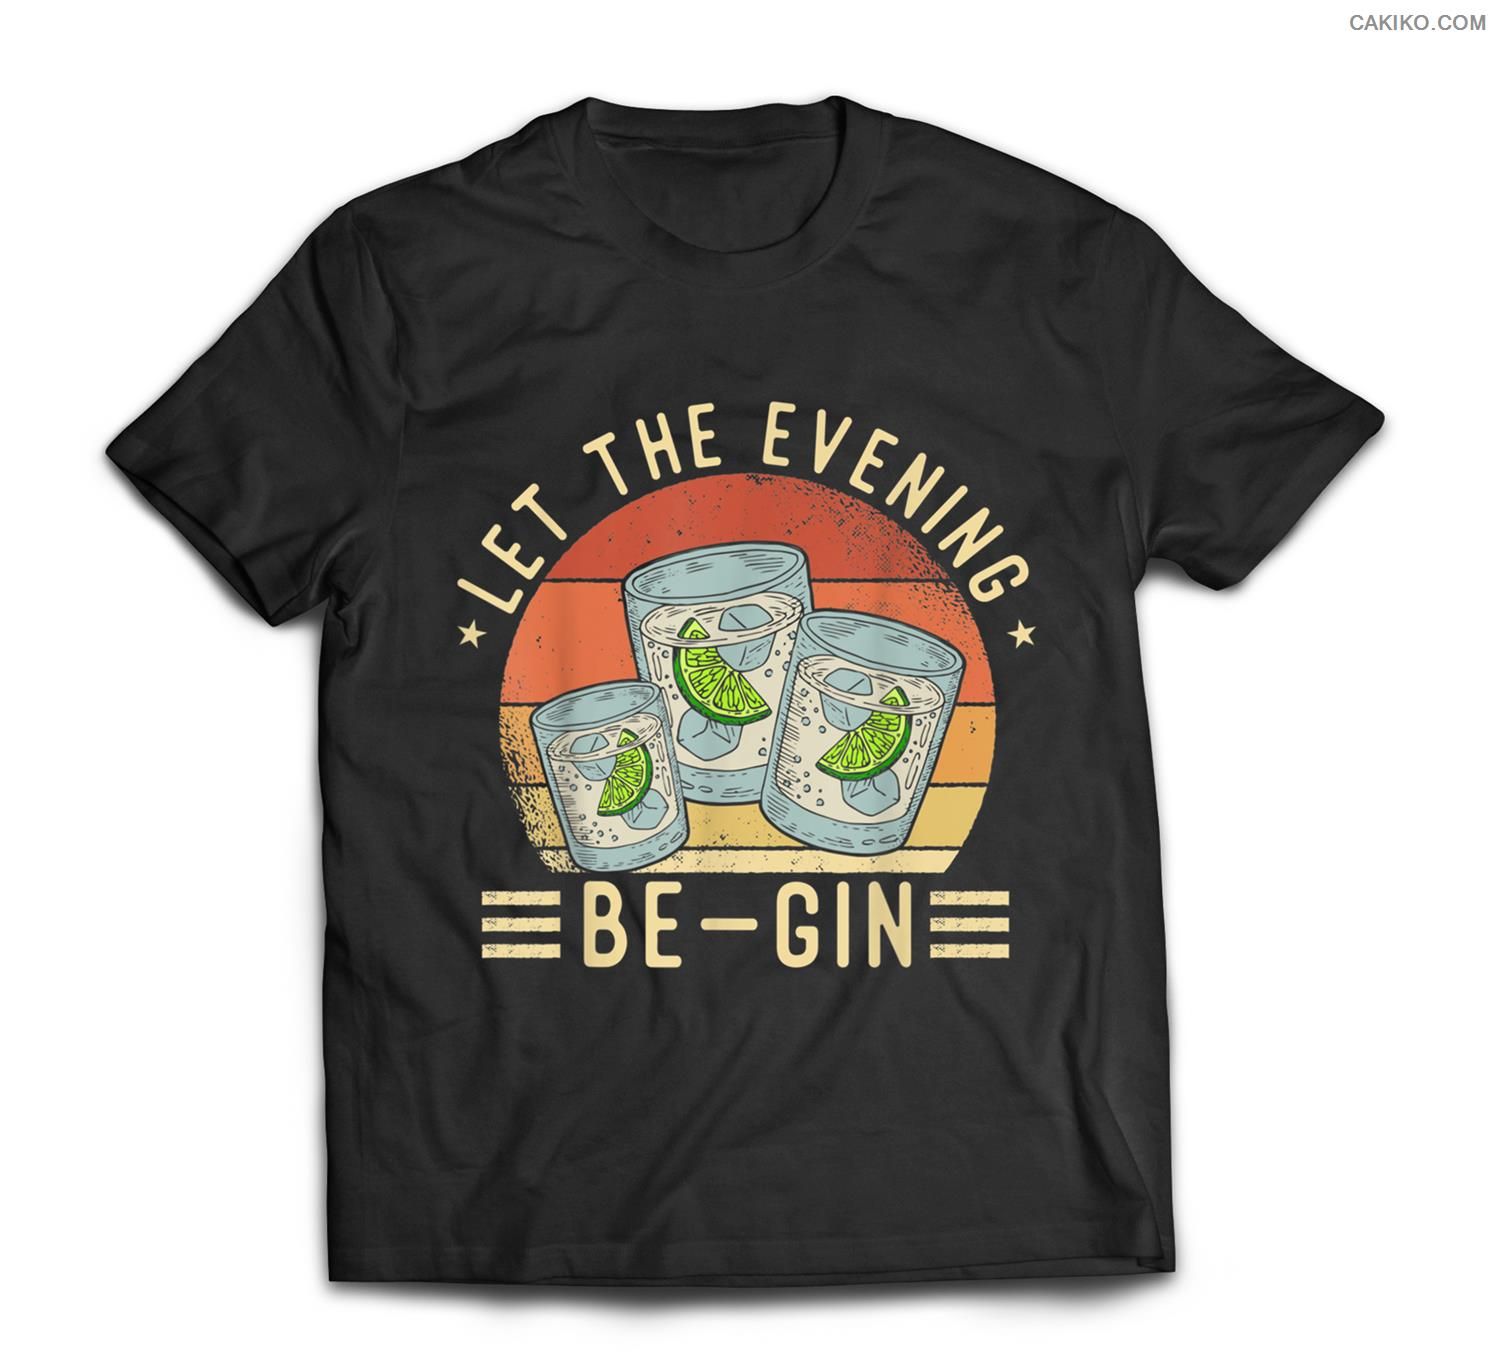 Let The Evening Be Gin , International Beer Day T-Shirt